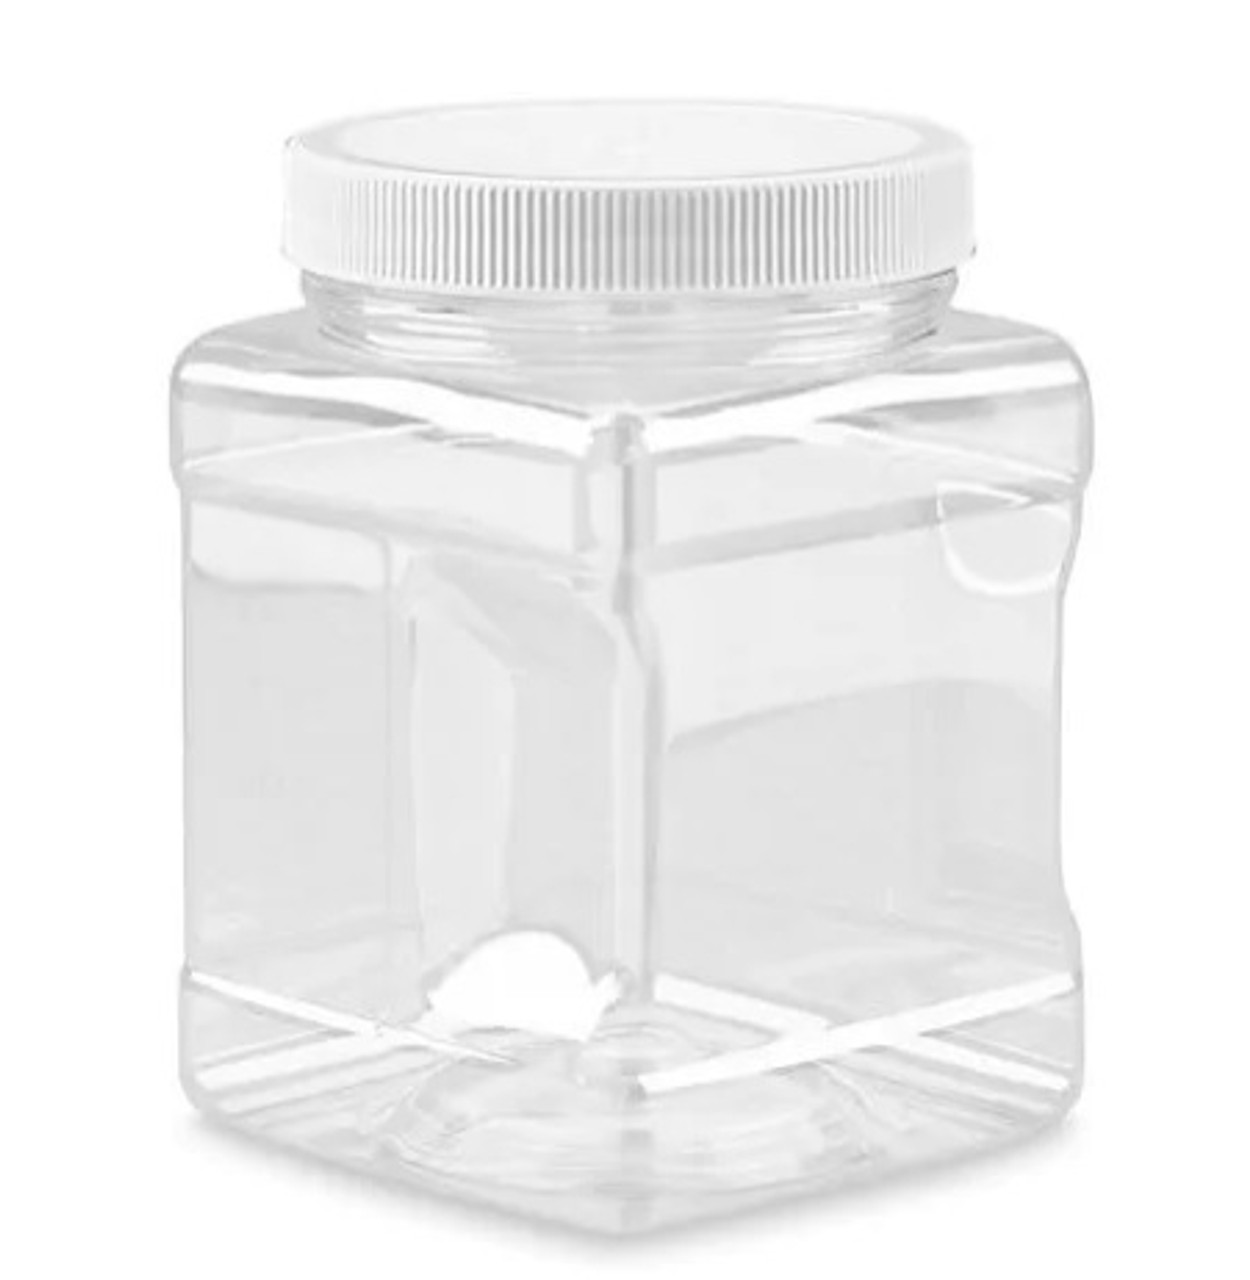 Wide-Mouth PET Grip Jar with Lid, 32 oz, Clear, 12 Piece